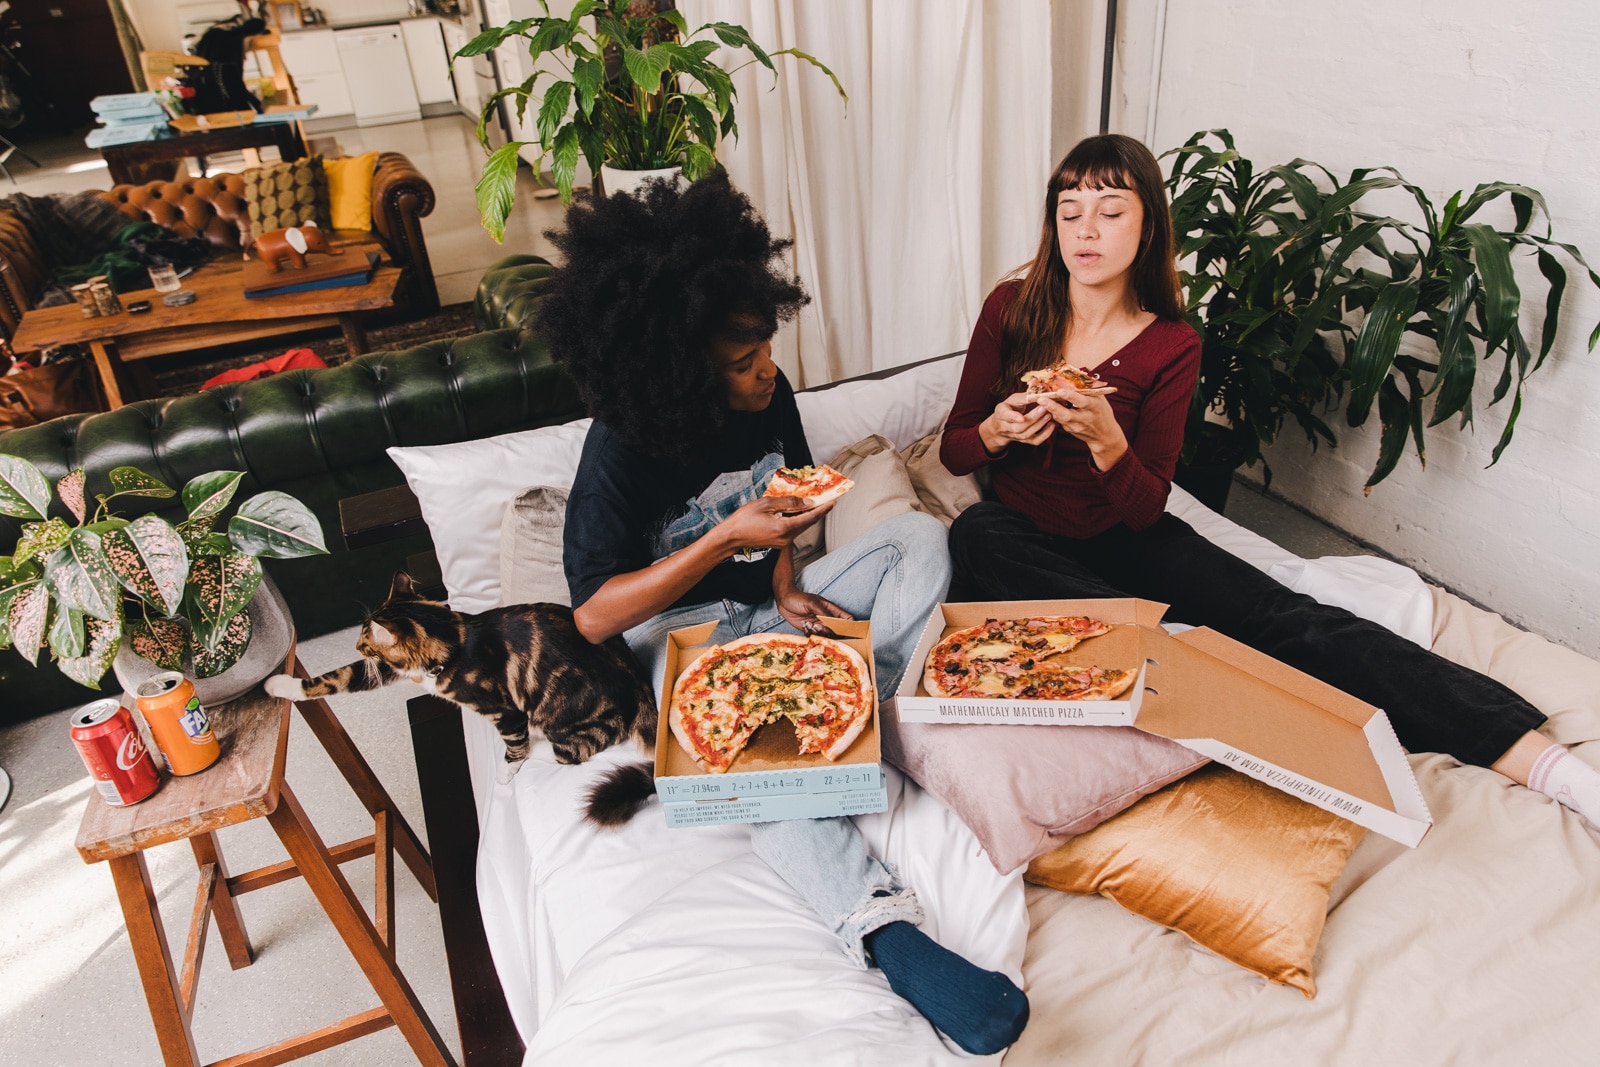 Enjoy our Gourmet Pizza in the comfort of your own home